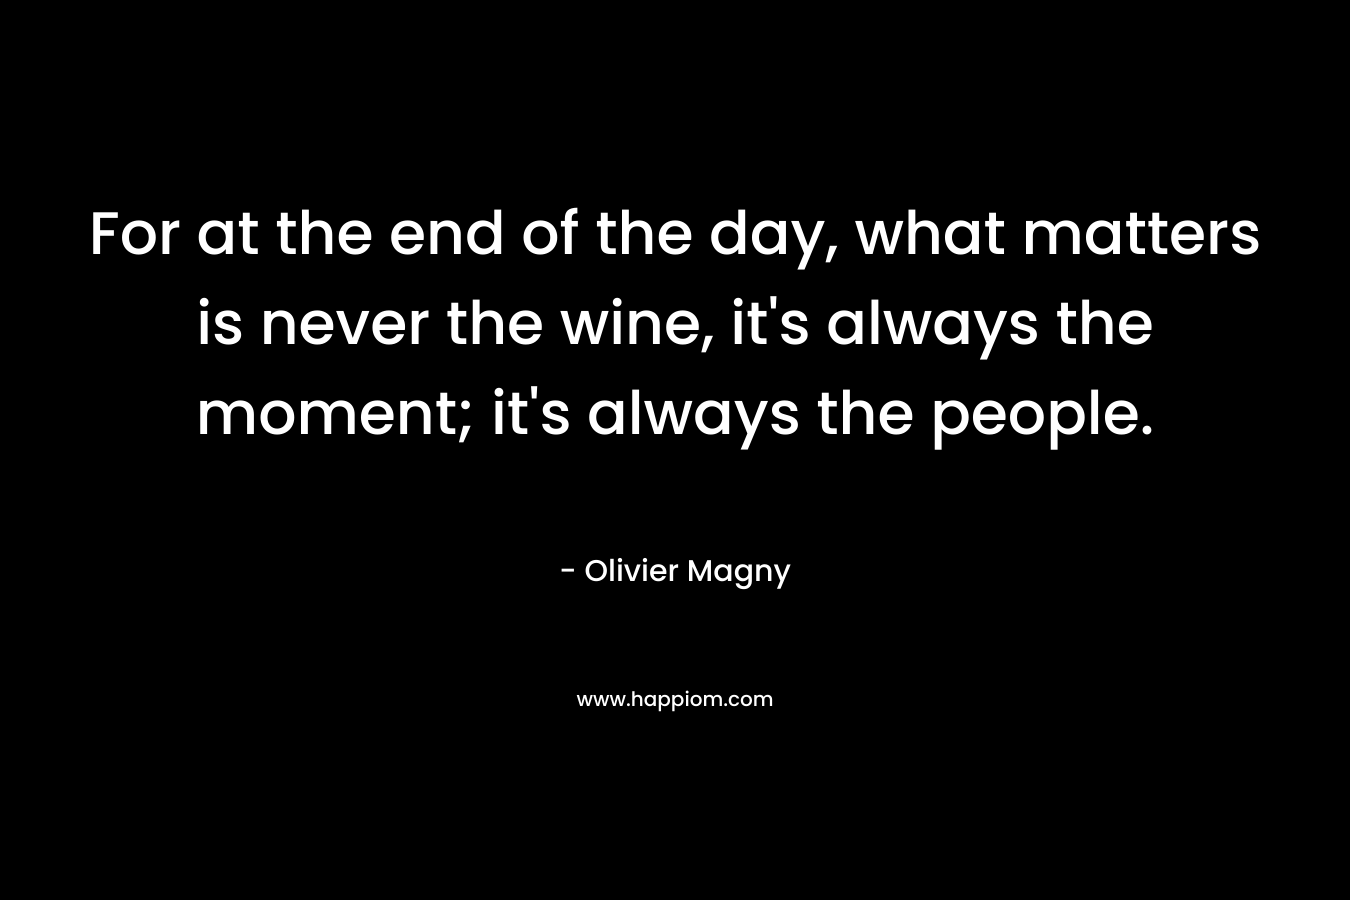 For at the end of the day, what matters is never the wine, it's always the moment; it's always the people.